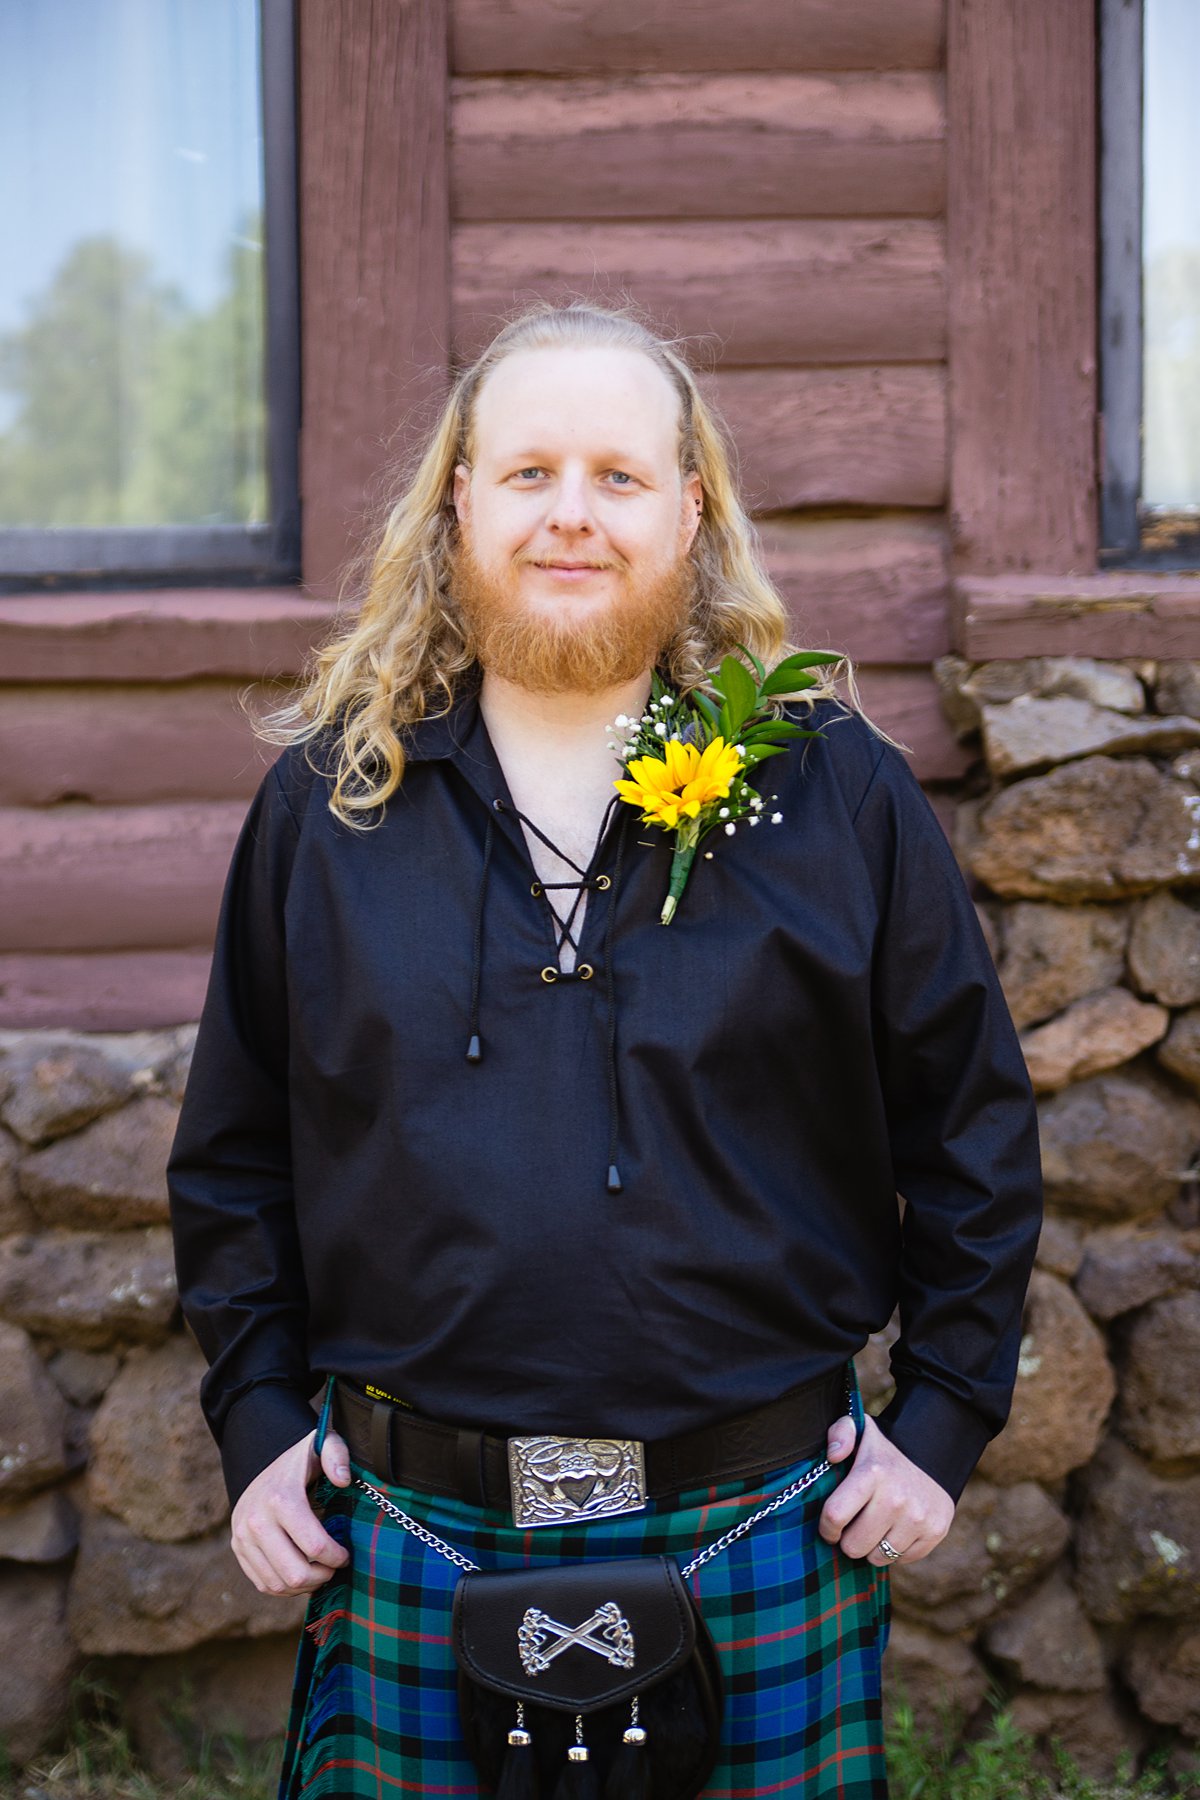 Groom in a Scottish wedding kilt and sunflower boutonniere by PMA Photography.